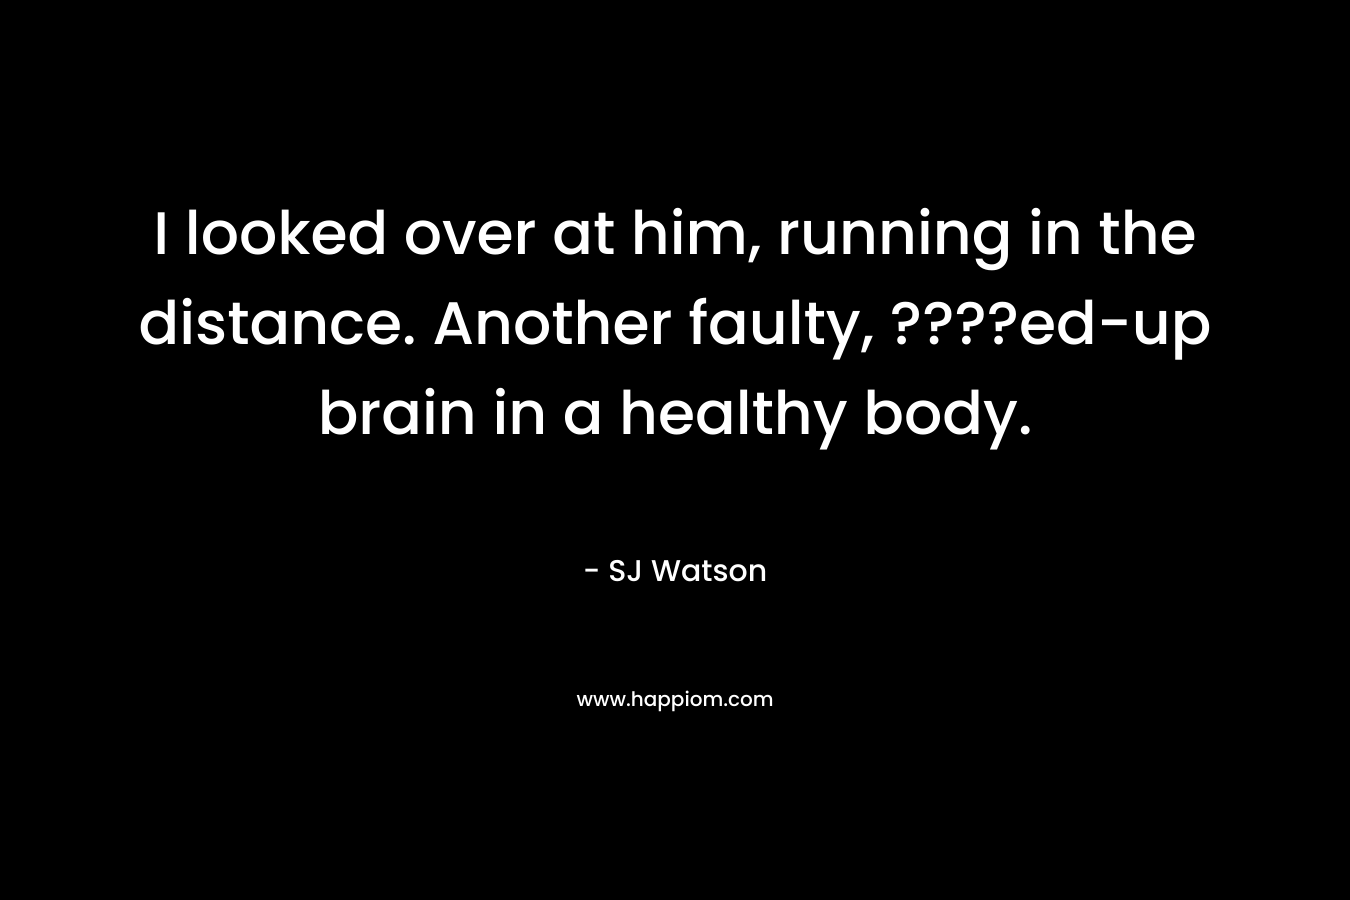 I looked over at him, running in the distance. Another faulty, ????ed-up brain in a healthy body.